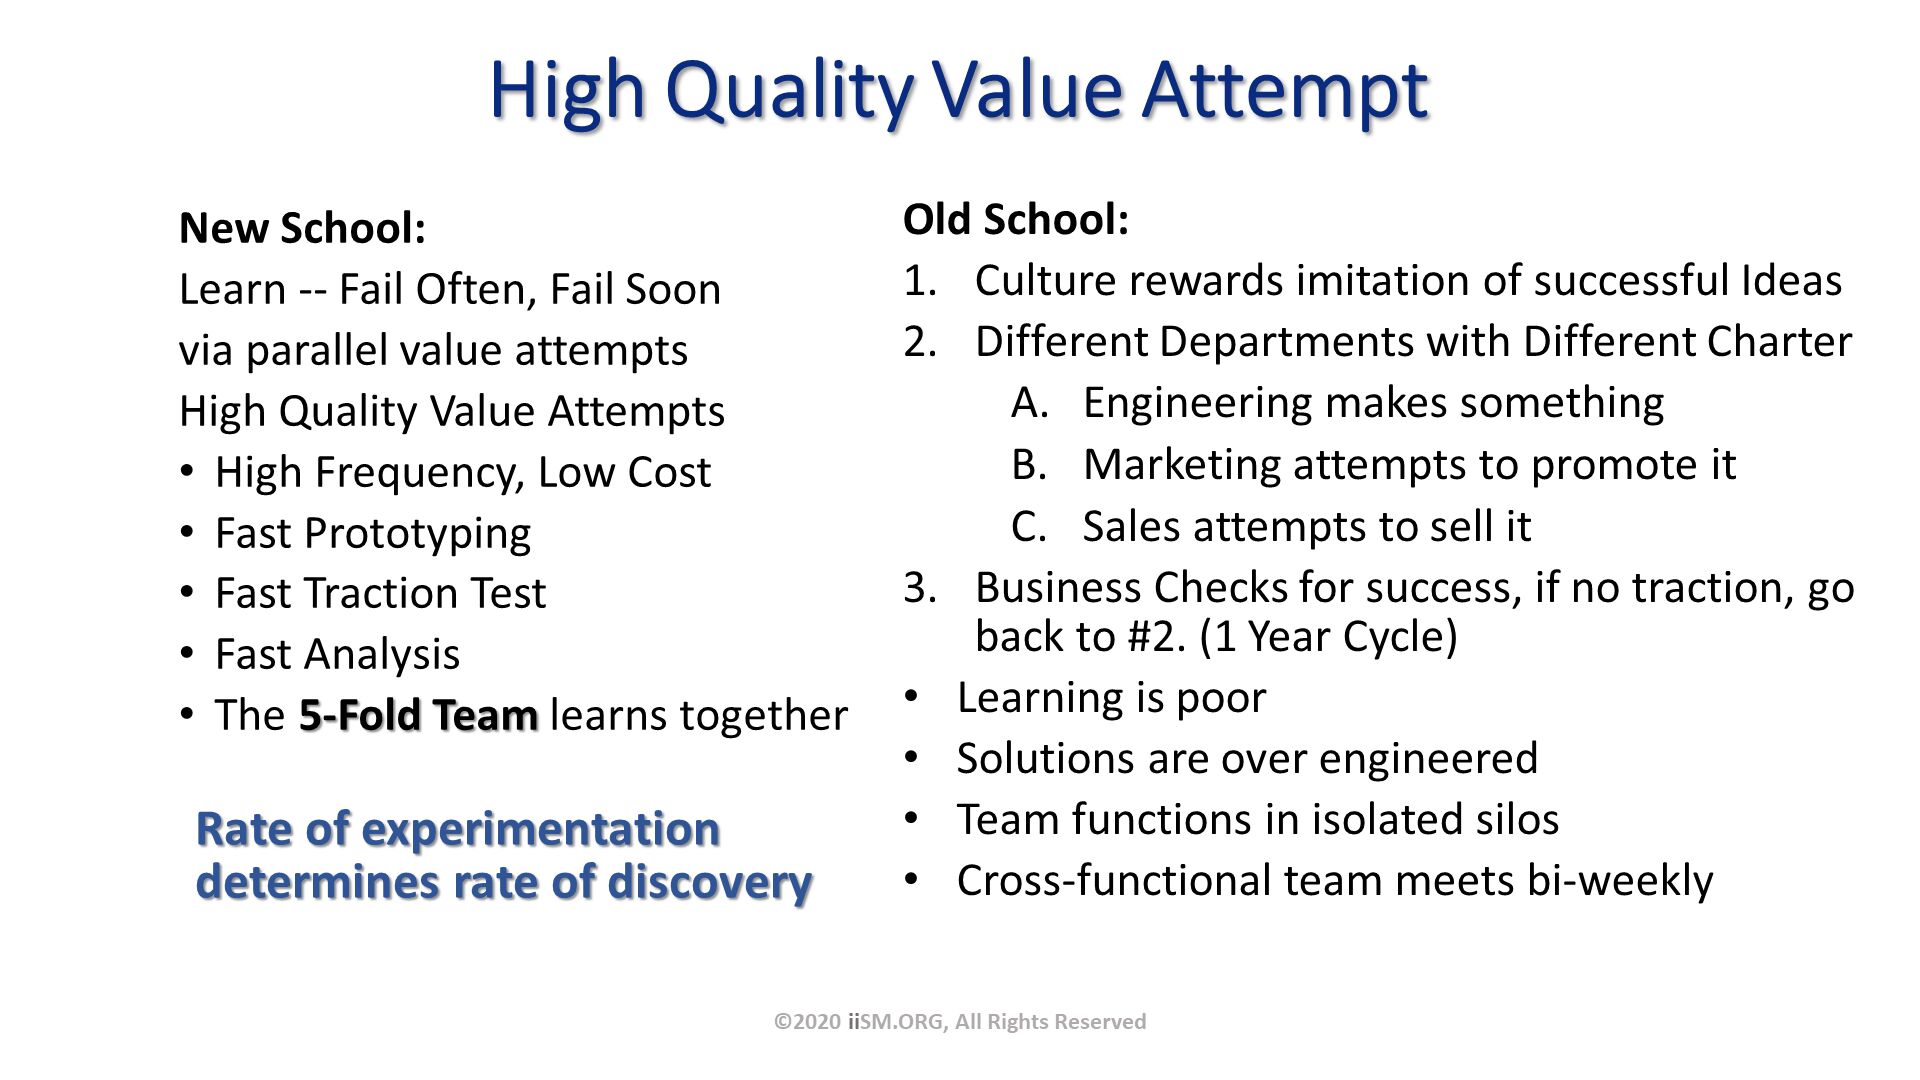 High Quality Value Attempt. New School:
Learn -- Fail Often, Fail Soon 
via parallel value attempts
High Quality Value Attempts
High Frequency, Low Cost
Fast Prototyping
Fast Traction Test
Fast Analysis
The 5-Fold Team learns together. ©2020 iiSM.ORG, All Rights Reserved. Old School:
Culture rewards imitation of successful Ideas
Different Departments with Different Charter
Engineering makes something
Marketing attempts to promote it
Sales attempts to sell it
Business Checks for success, if no traction, go back to #2. (1 Year Cycle)
Learning is poor
Solutions are over engineered
Team functions in isolated silos
Cross-functional team meets bi-weekly. Rate of experimentation determines rate of discovery
. 